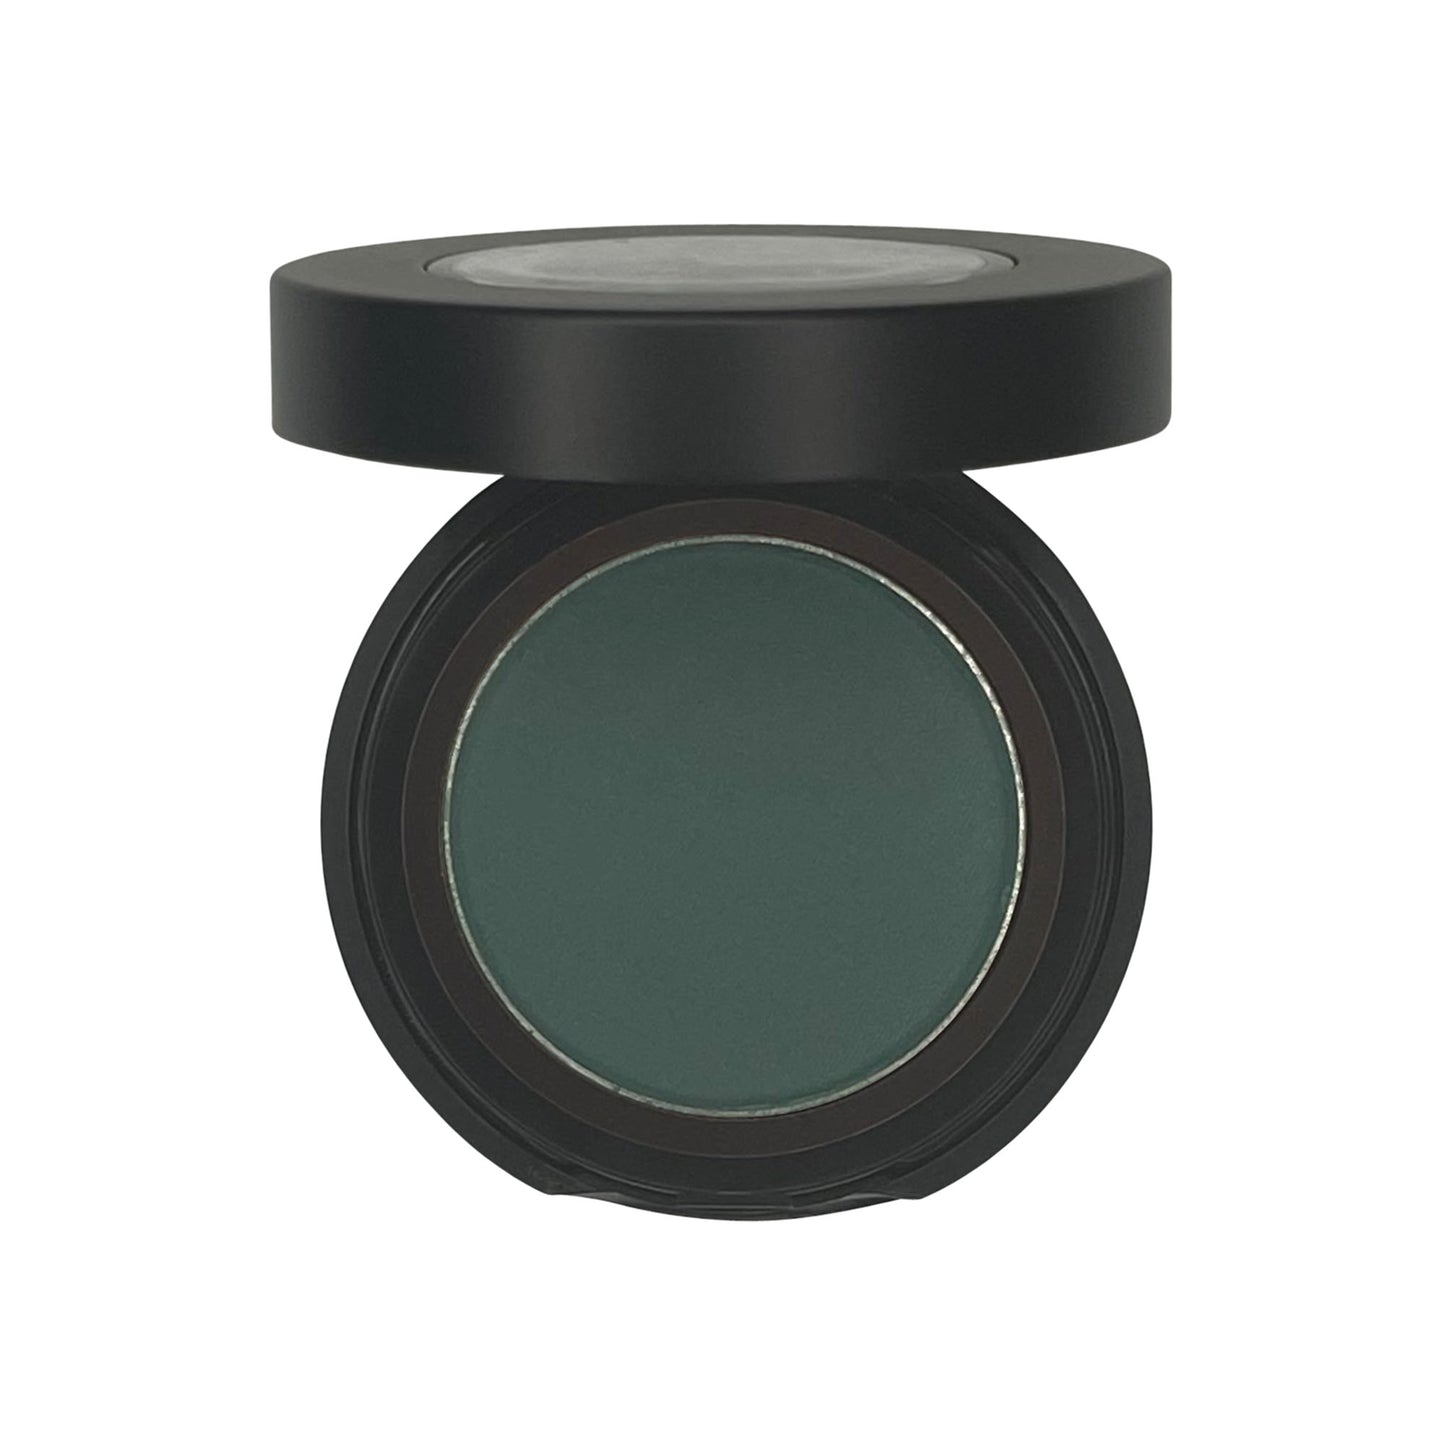 Freshen up your eyes with the vibrant kinergy landscape of Cruisin Organics Single Pan Eyeshadow. Bye gone dullness and spruce up those greens like the color of cash.